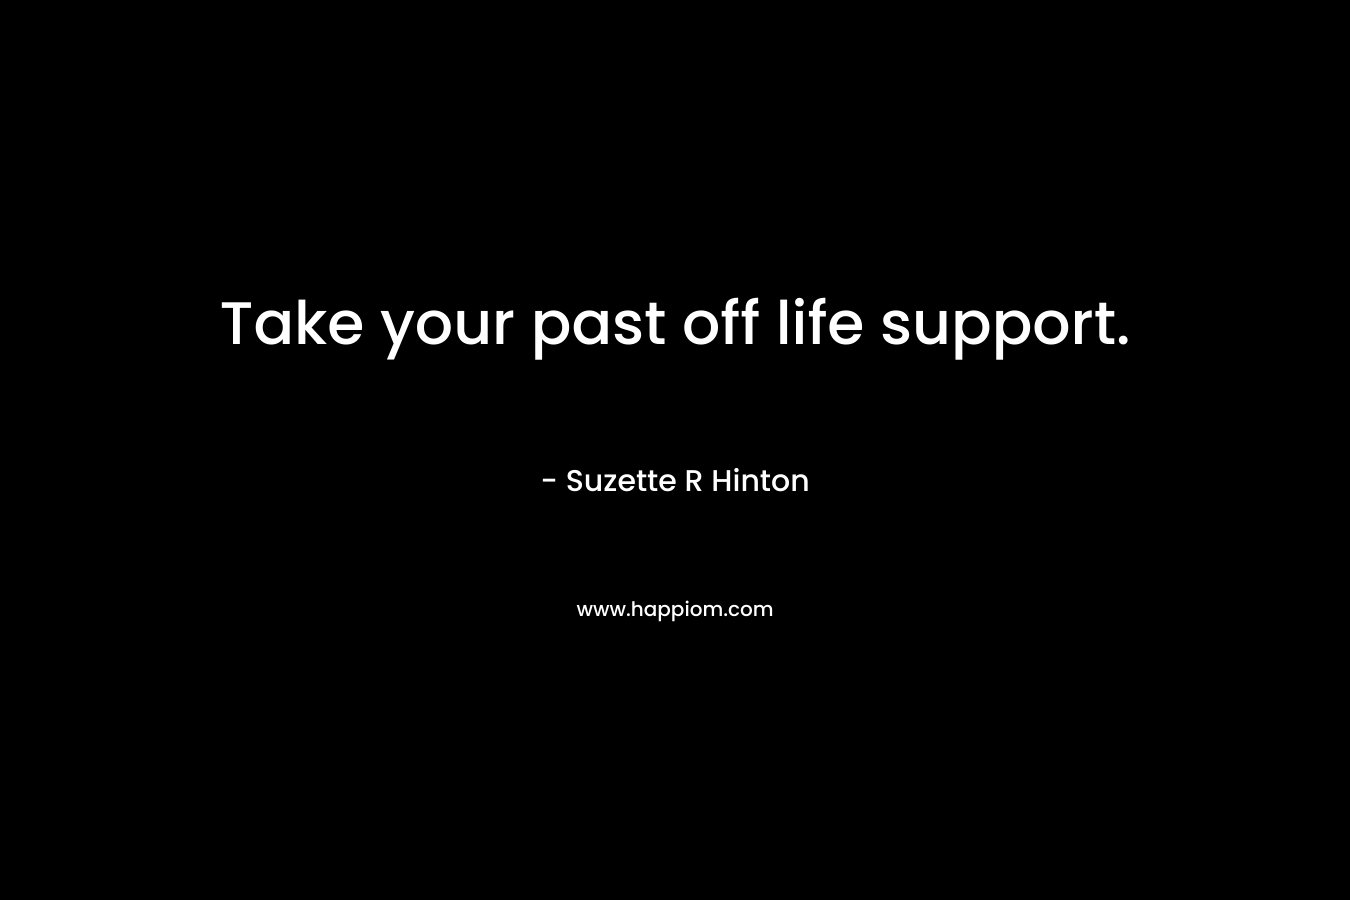 Take your past off life support.